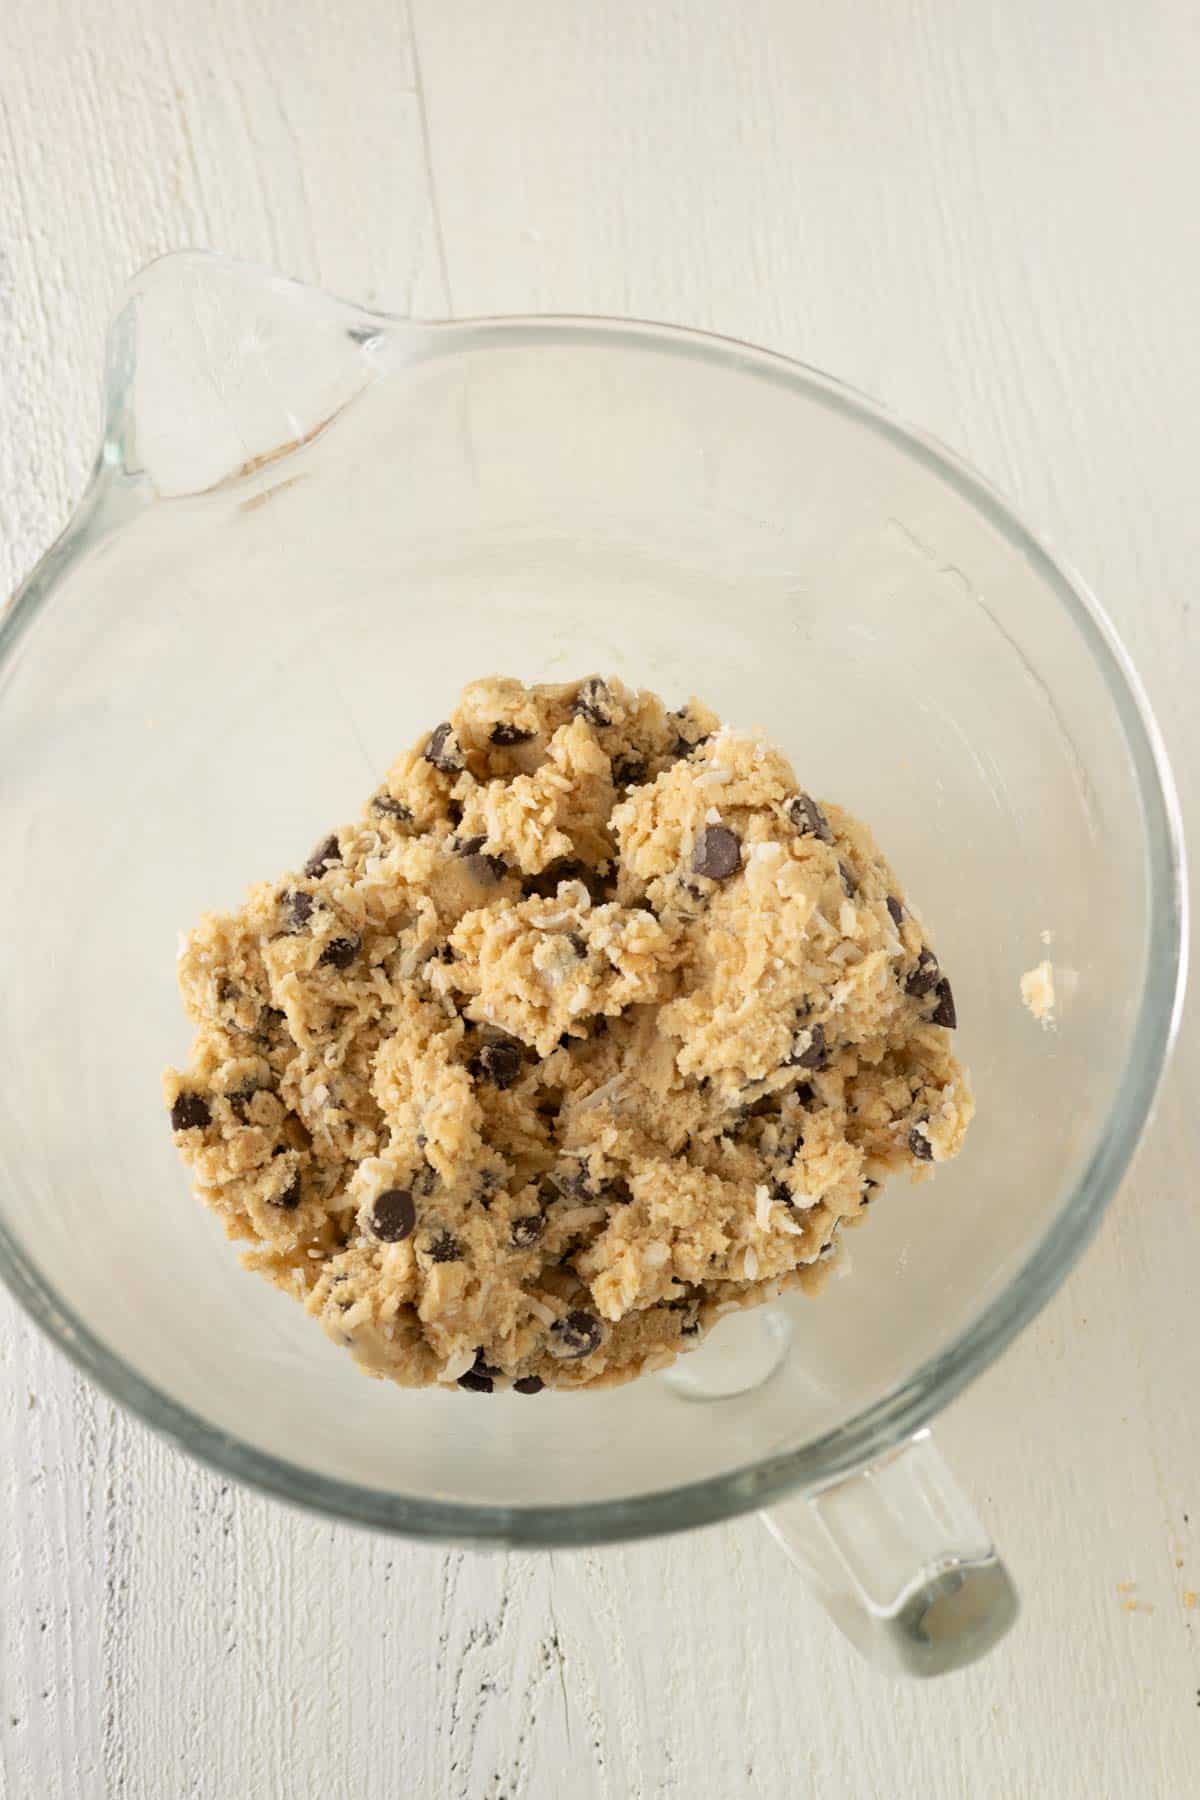 A mixing bowl with chocolate chip cookie dough.